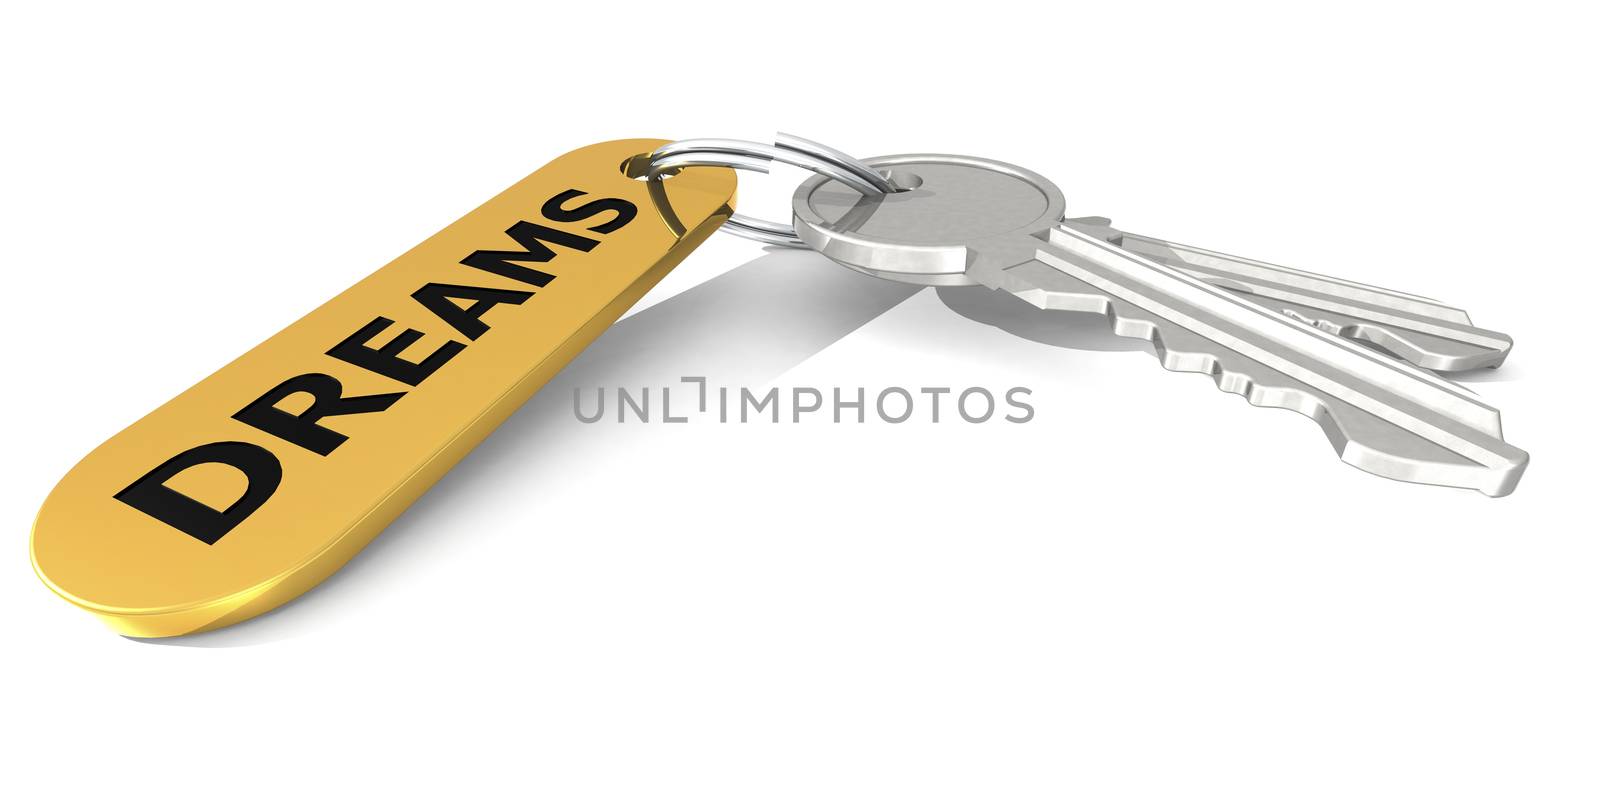 Dreams label attached to the keys, 3D rendering